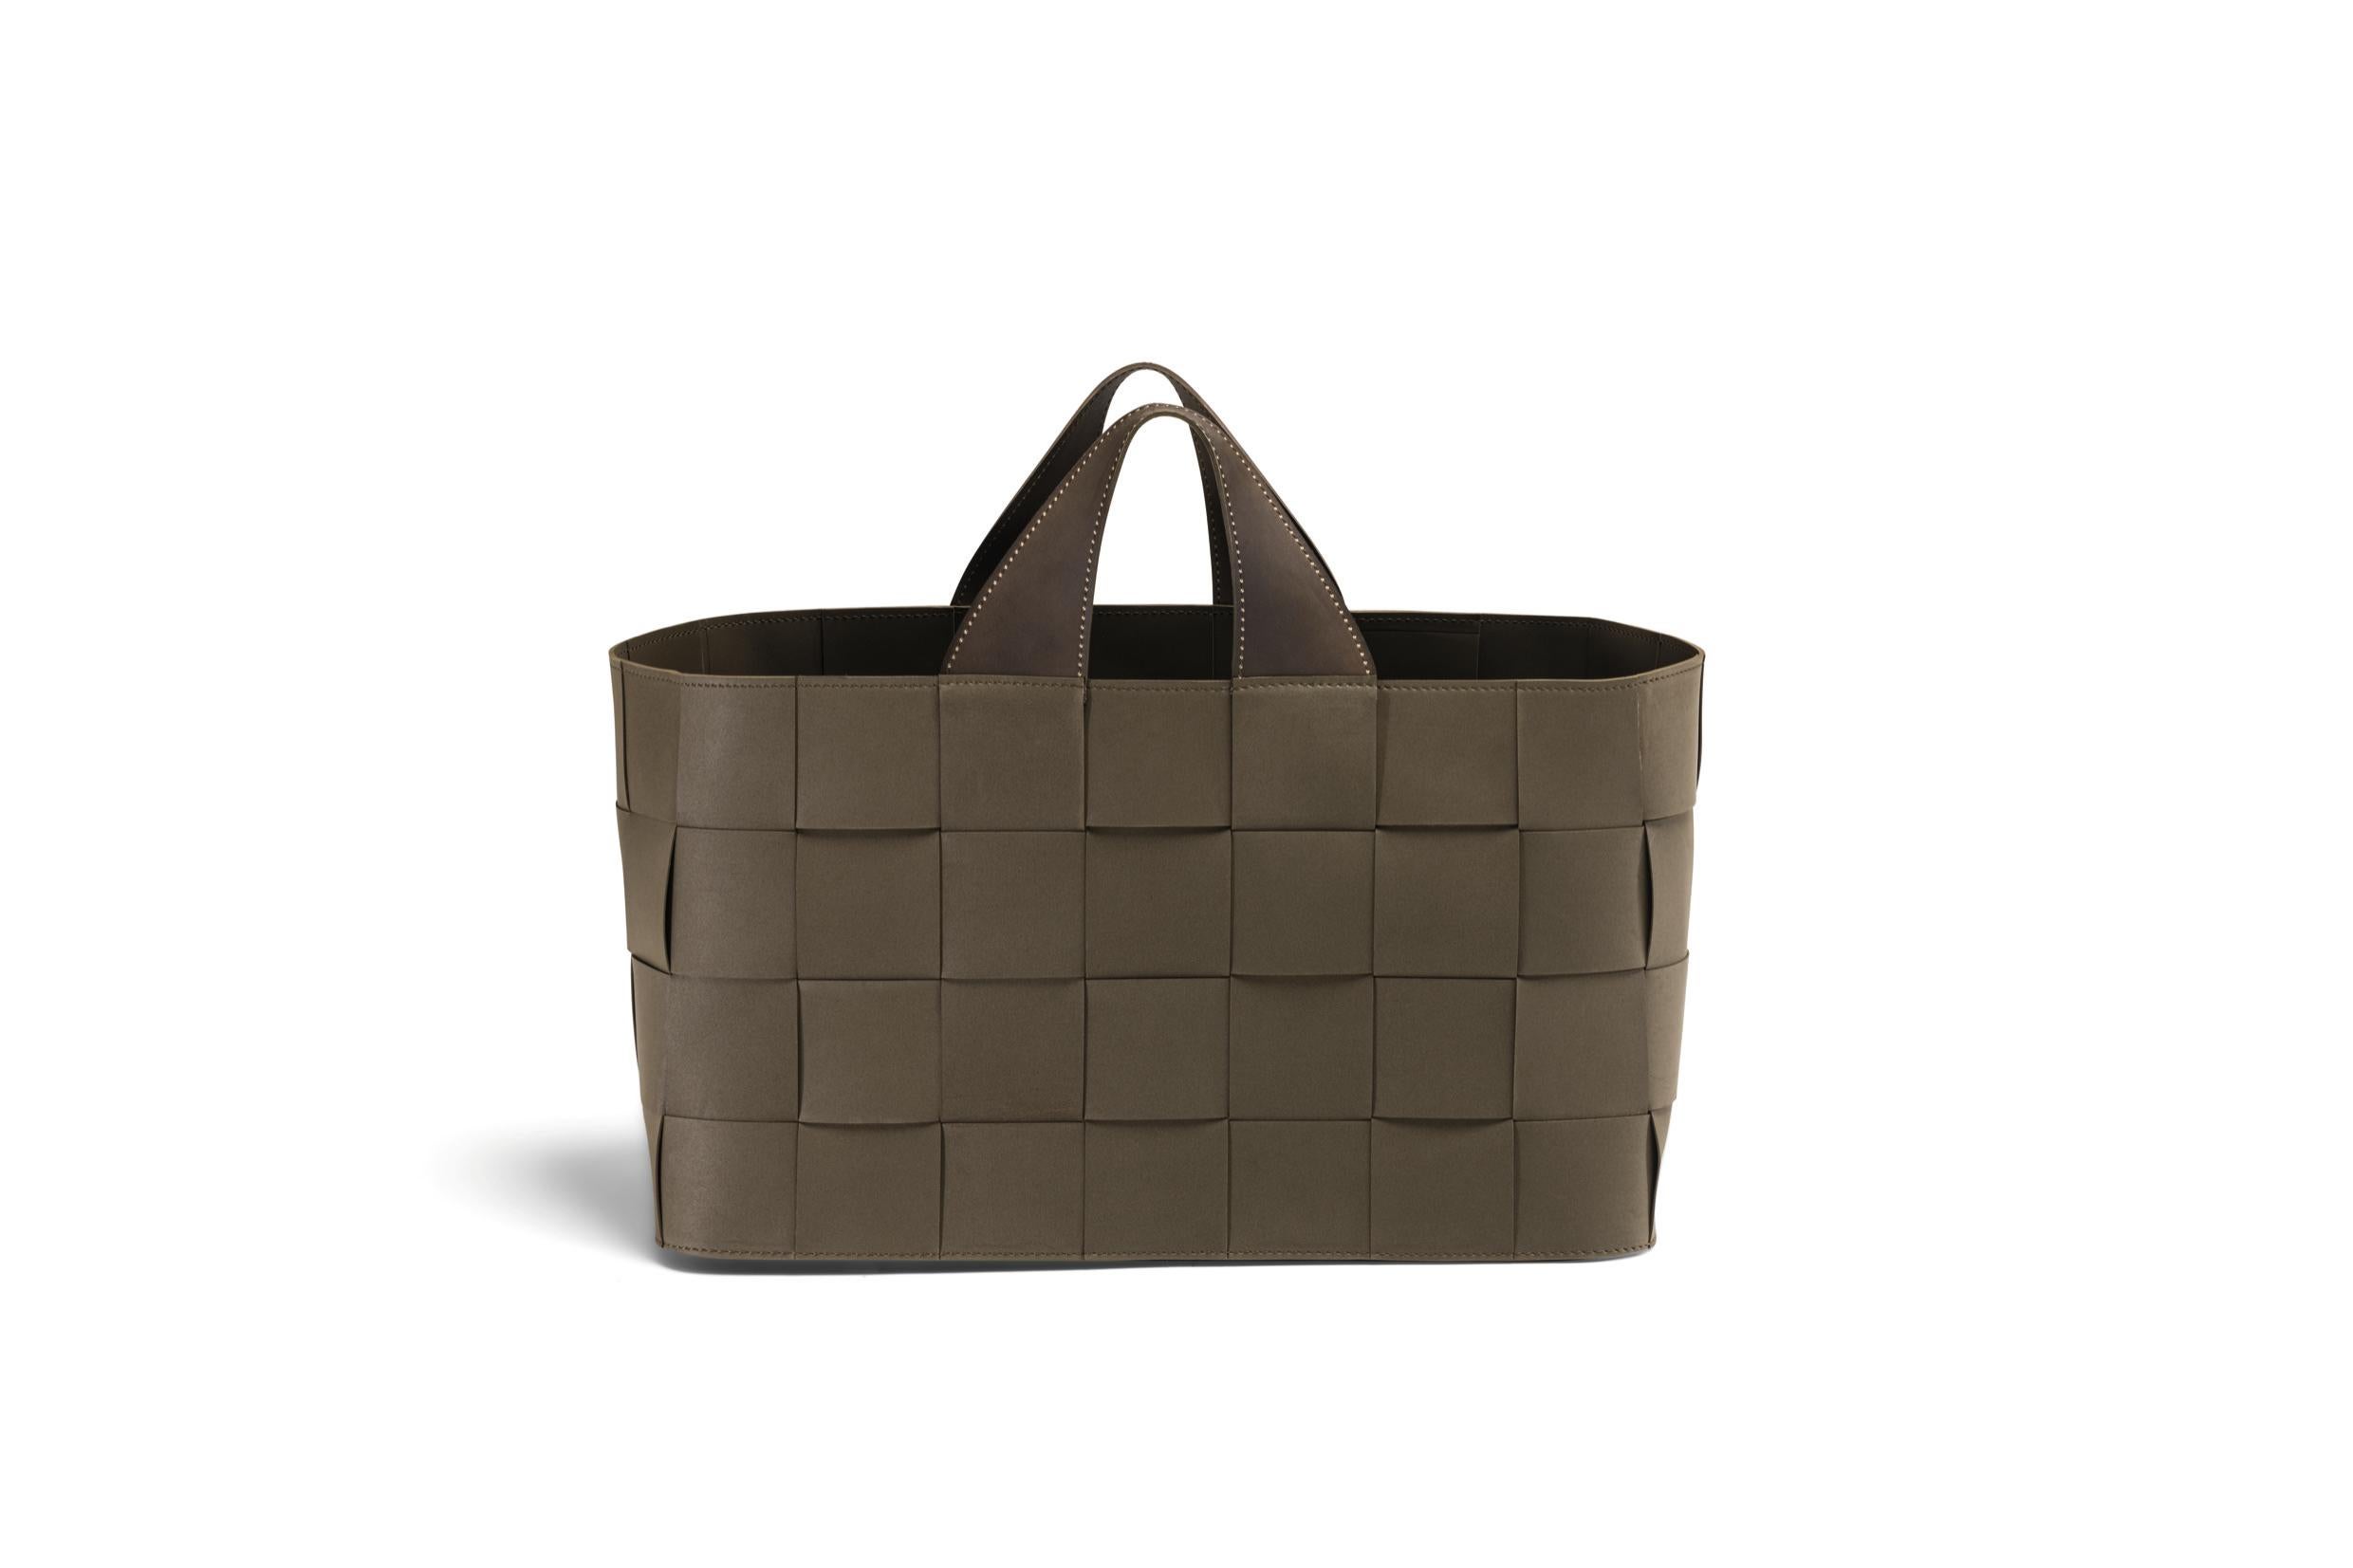 Outdoor Basket Olive Green Molteni&C by Vincent van Duysen Design

The Boulogne baskets capture the essence of the Outdoor Molteni&C collection in an elegant outdoor accessory, perfect for storing towels, cushions, or children's water toys by the